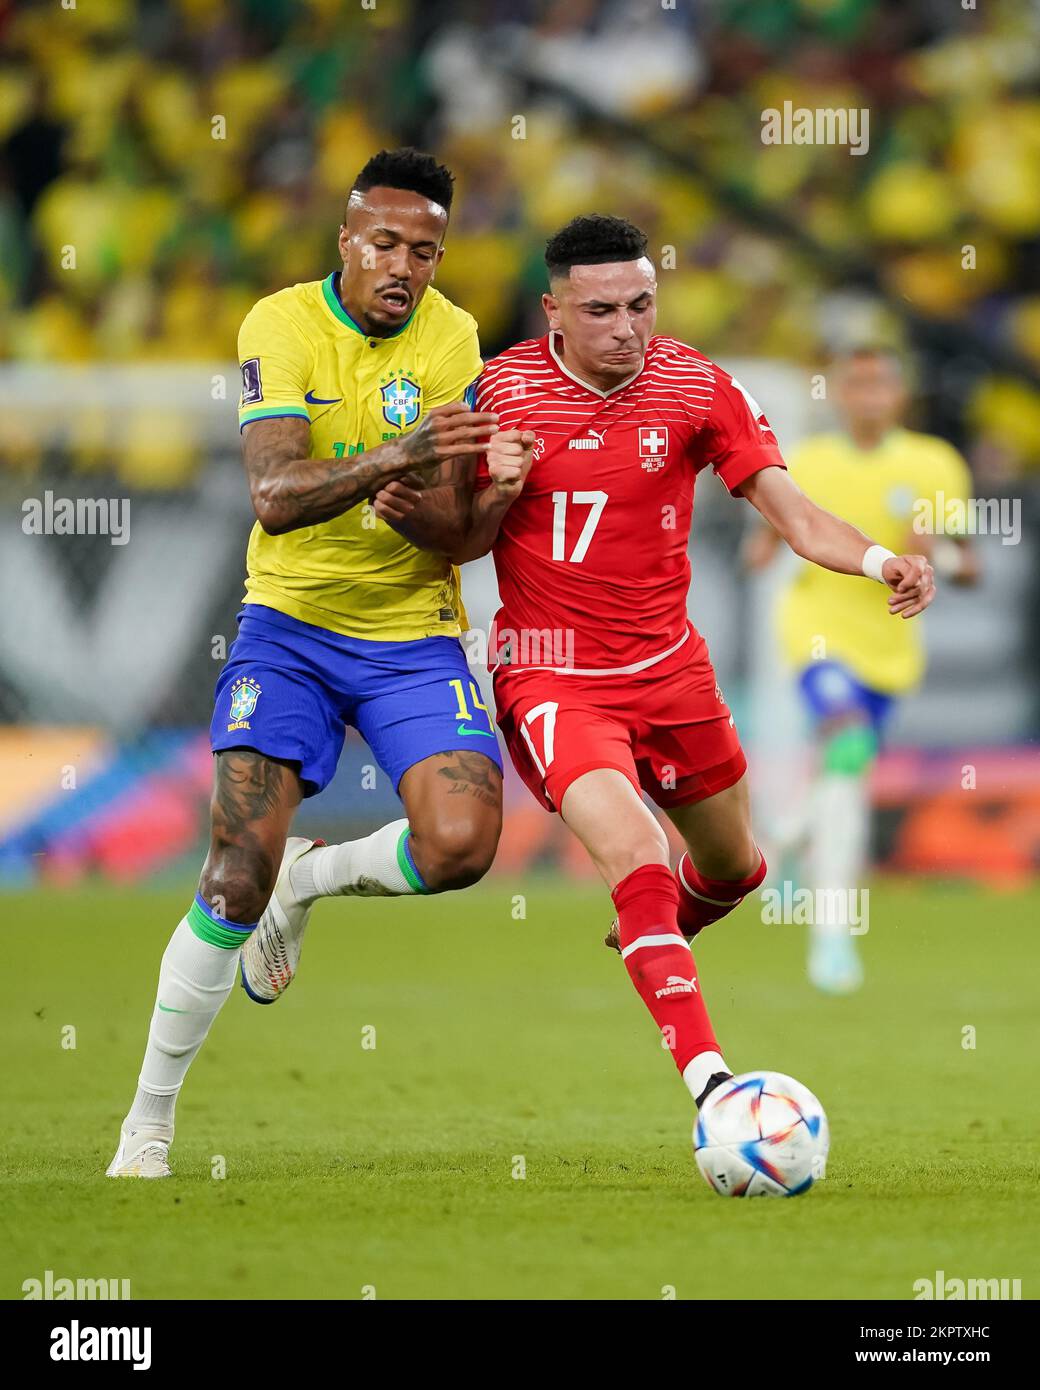 DOHA, QATAR - NOVEMBER 28: Player of Brazil Éder Militão fights for the ball with player of Switzerland Ruben Vargas during the FIFA World Cup Qatar 2022 group G match between Brazil and Switzerland at Stadium 974 on November 28, 2022 in Doha, Qatar. (Photo by Florencia Tan Jun/PxImages) Stock Photo